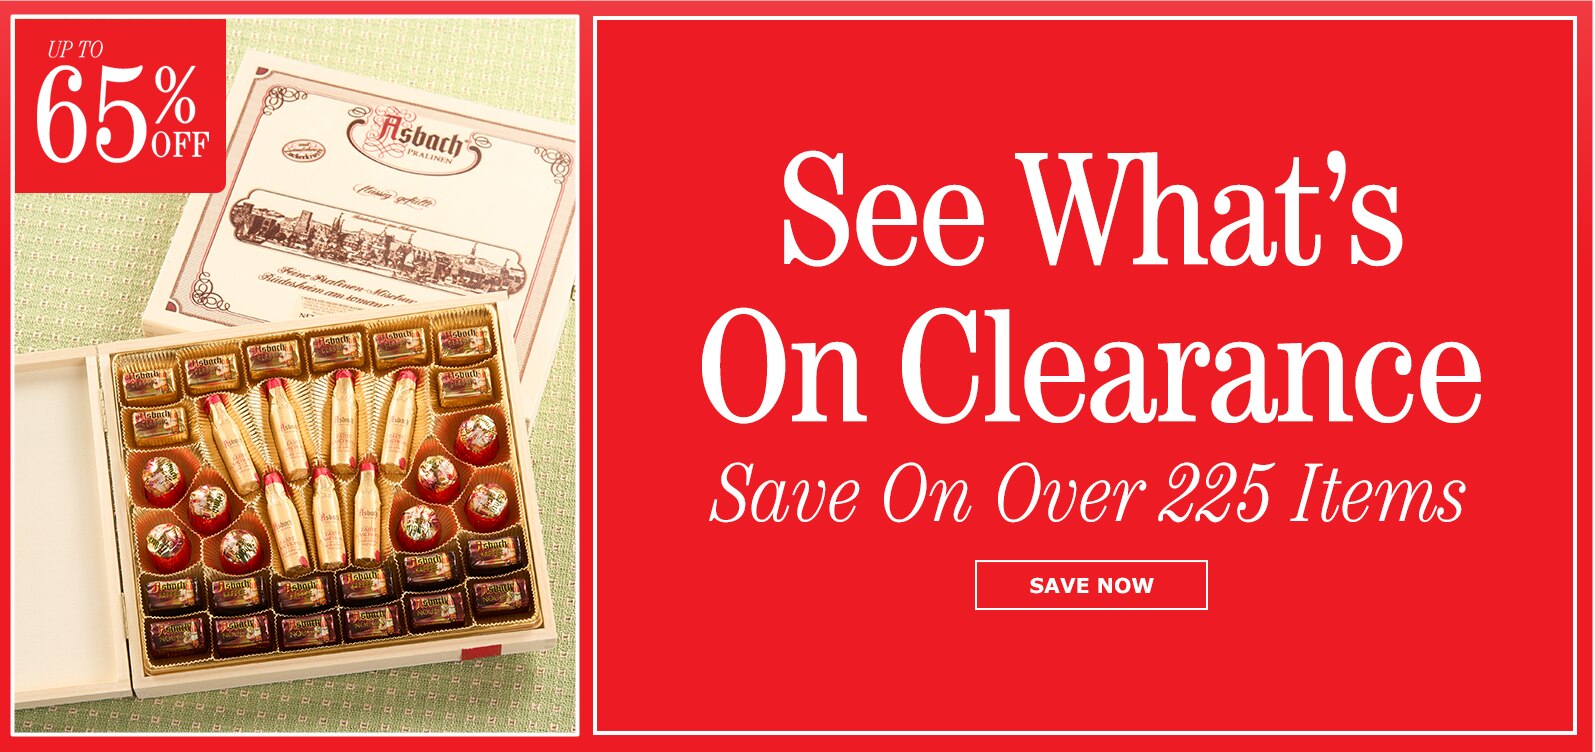 See What's On Clearance, Save On Over 225 Items. Up To 65% Off. Save Now